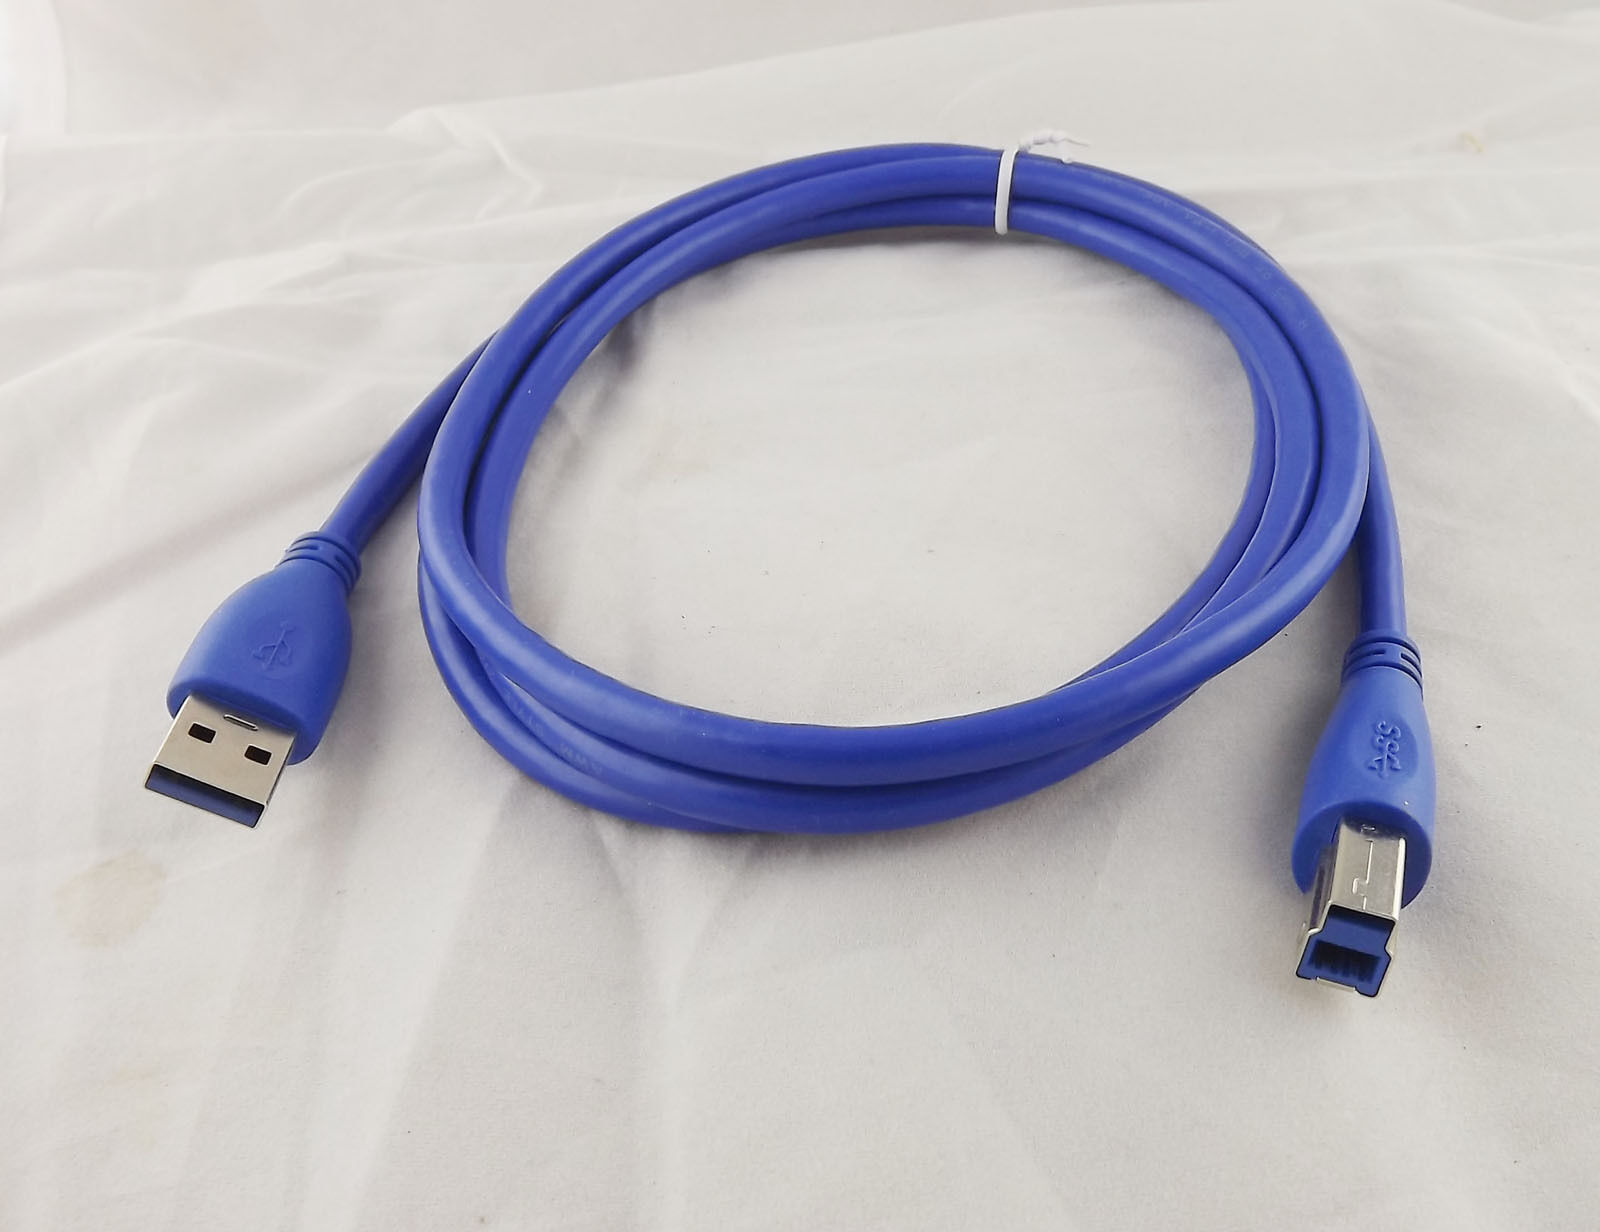 10x 1.5m/5ft USB 3.0 Type A Male Plug To B Male Printer Scanner Data Cord Cable